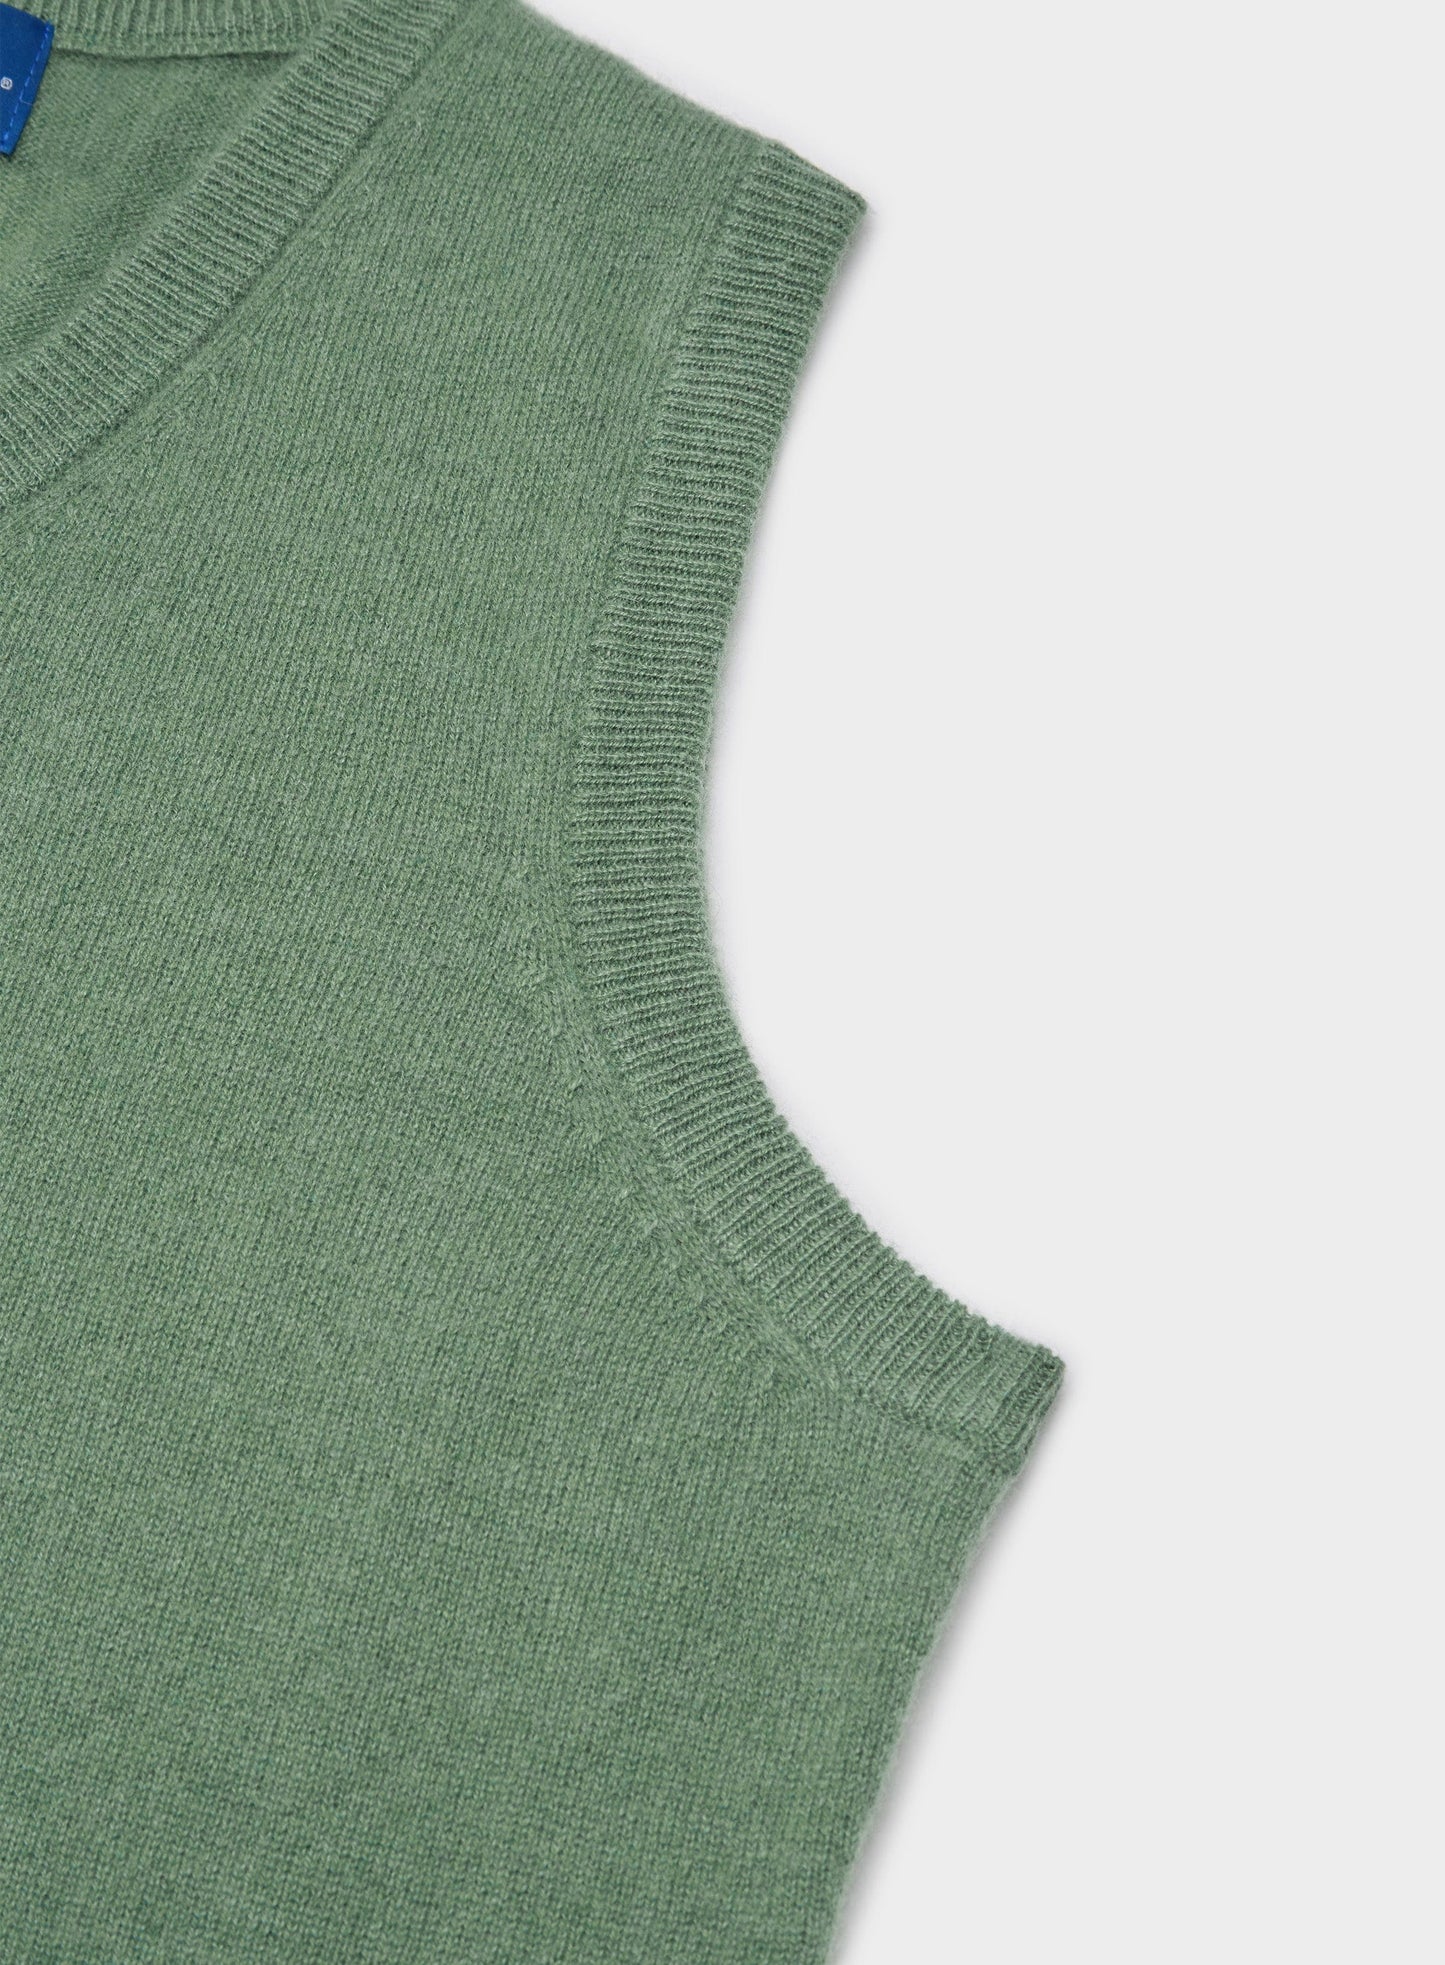 Cashmere Sleeveless in Green